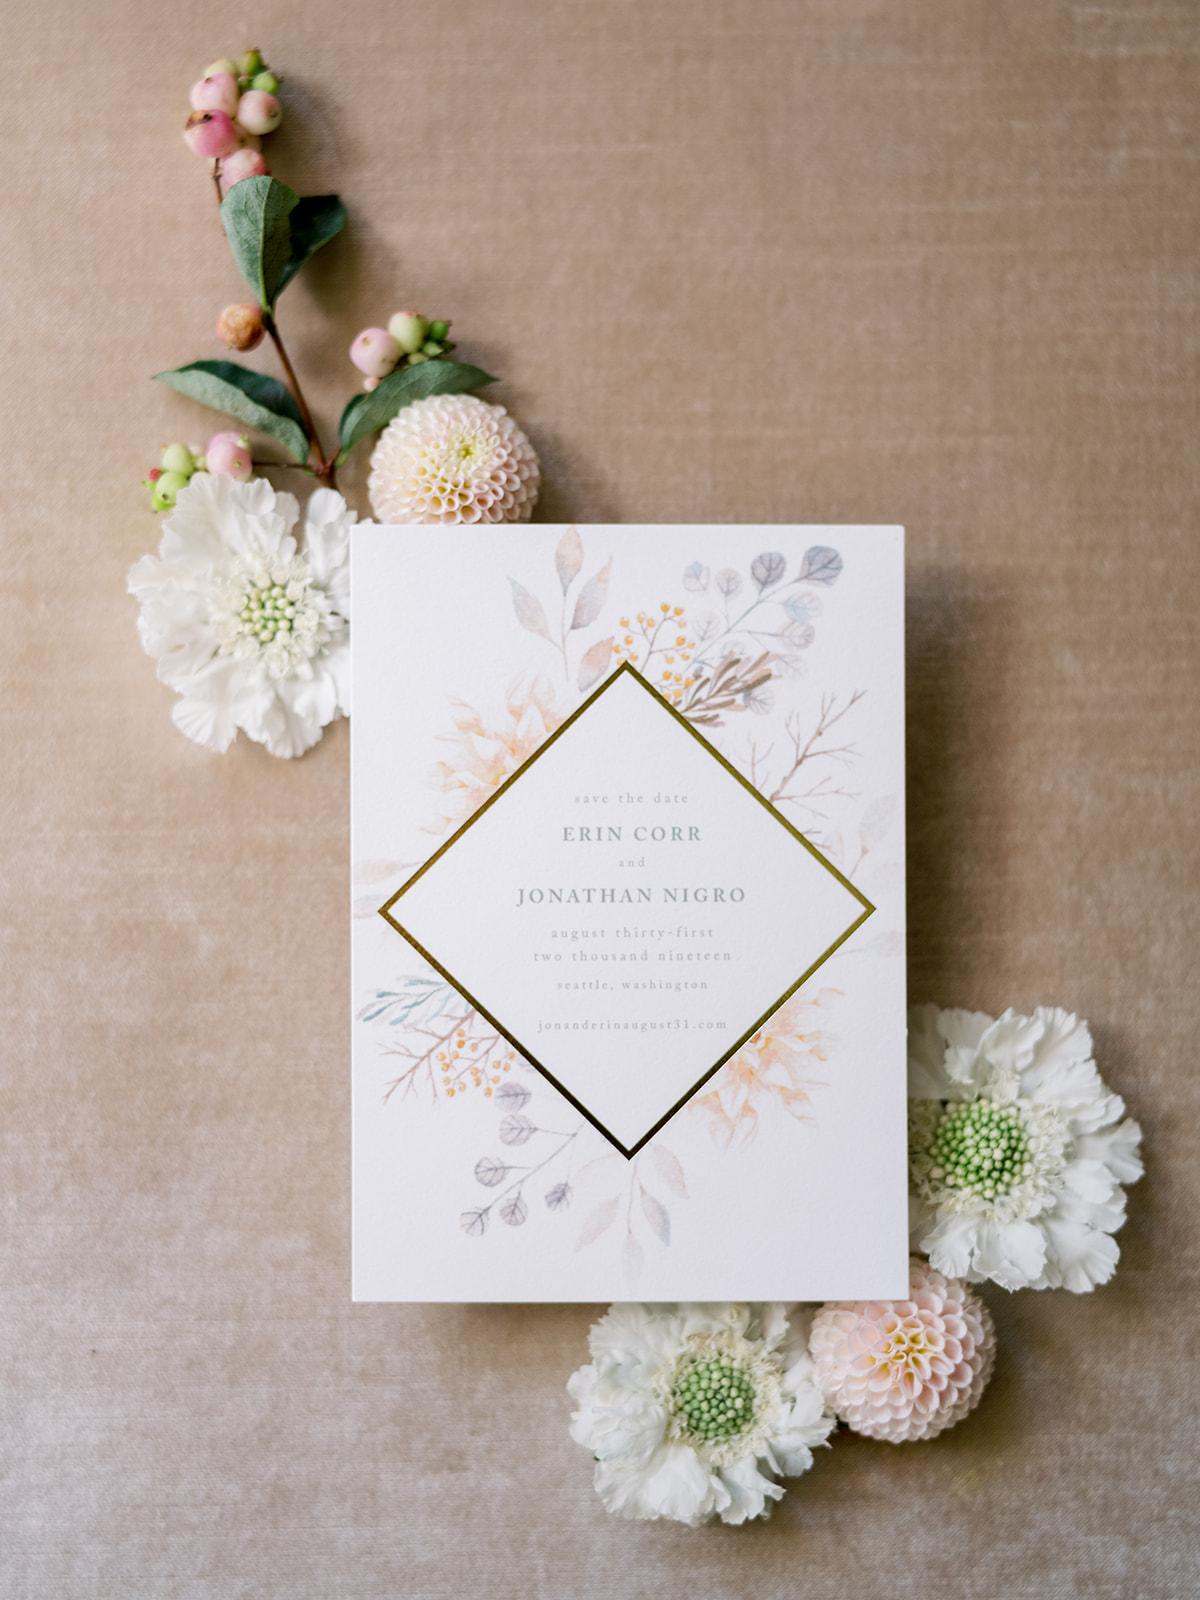 are-save-the-date-cards-necessary-in-the-year-2021